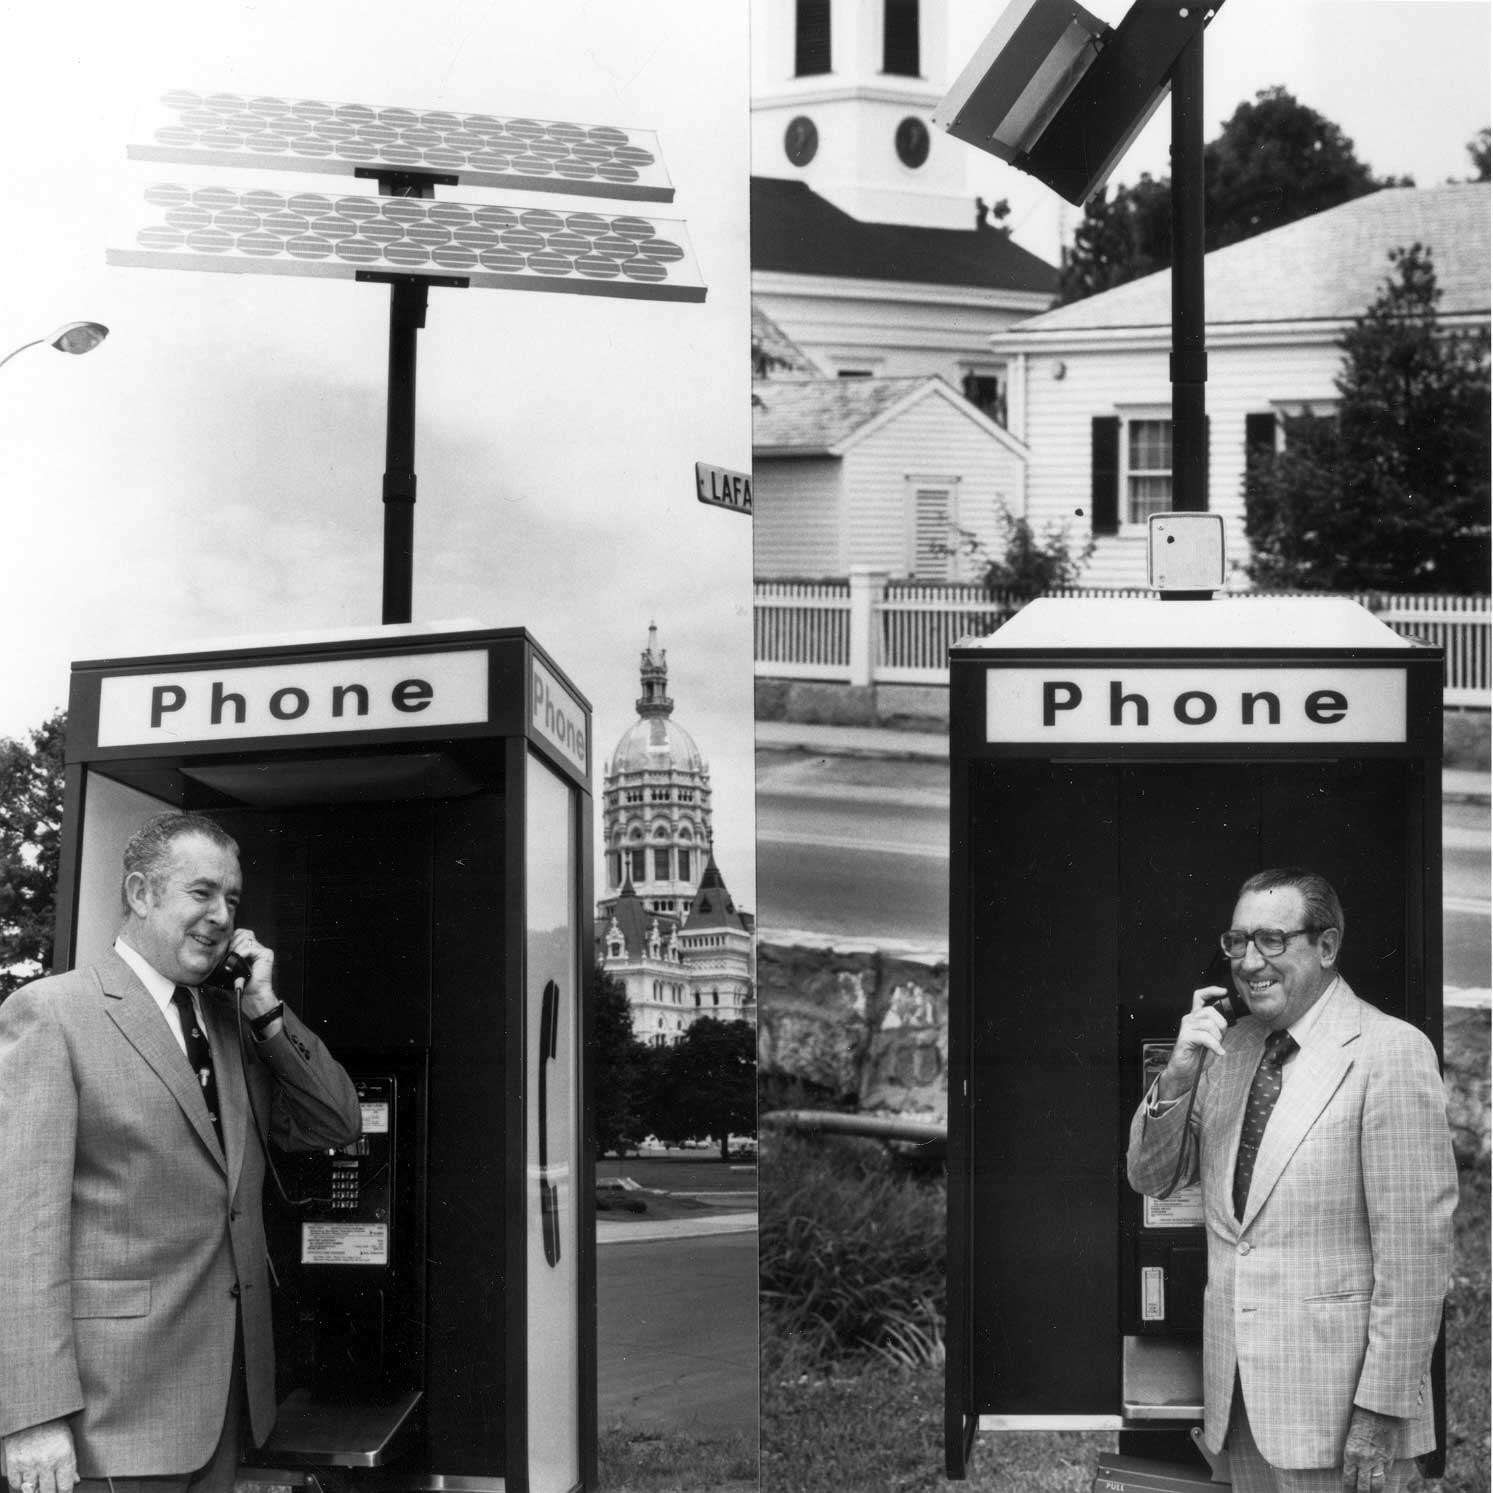 B&W 8X10 dated: 7/23/1982
Governor O'Neill and former Governor Dempsey telephoning each other over a 'solar' telephone by Southern New England Telephone (SNET). Gov. O'Neill is near the capitol, and Gov. Dempsey near Mystic Seaport.